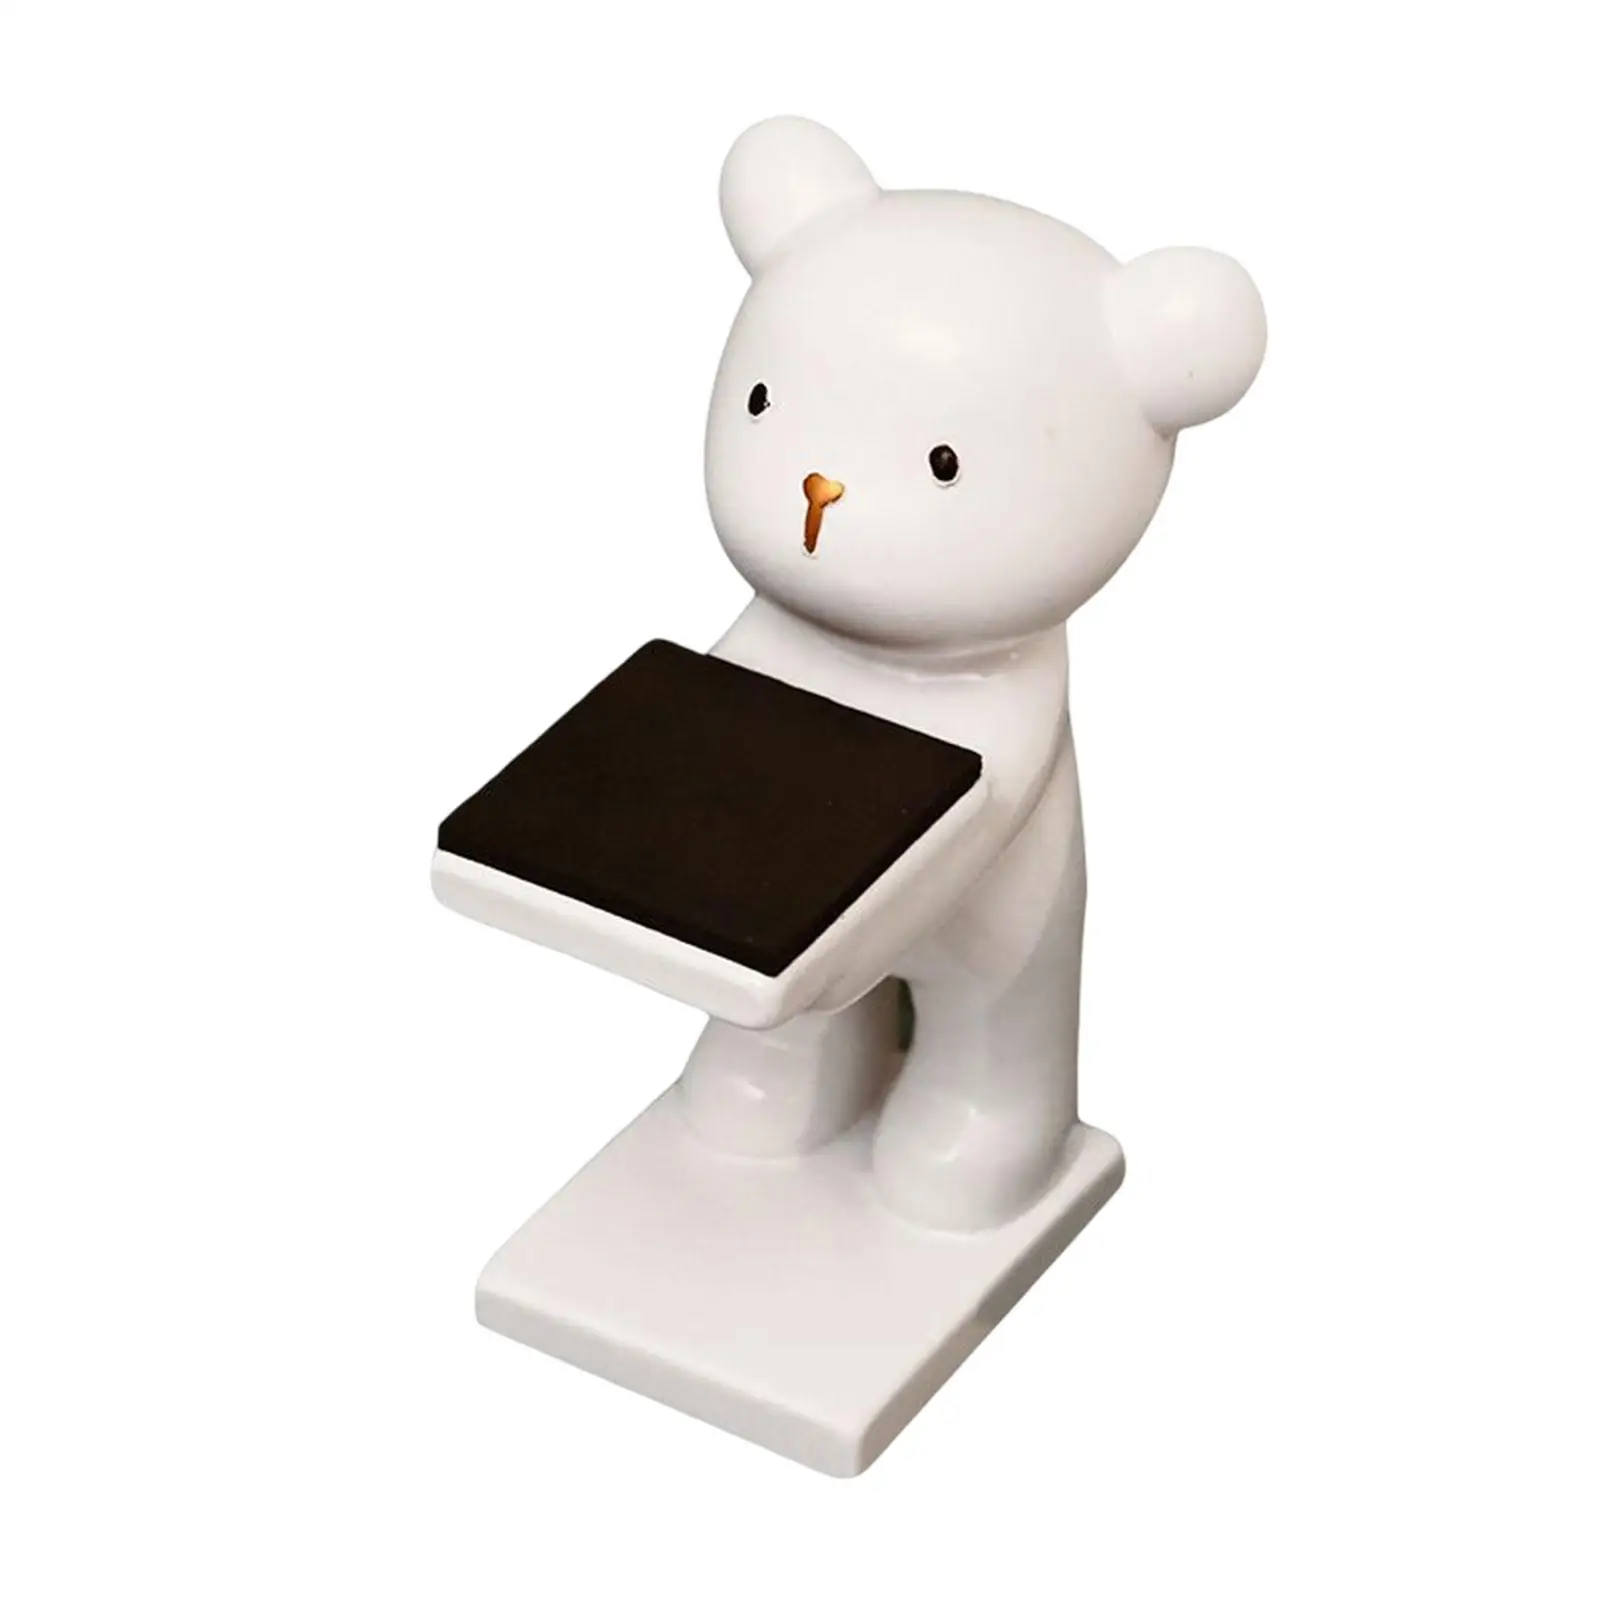 Cartoon Watch Stand Ornament Statue Figurine Watch Display Holder for Office